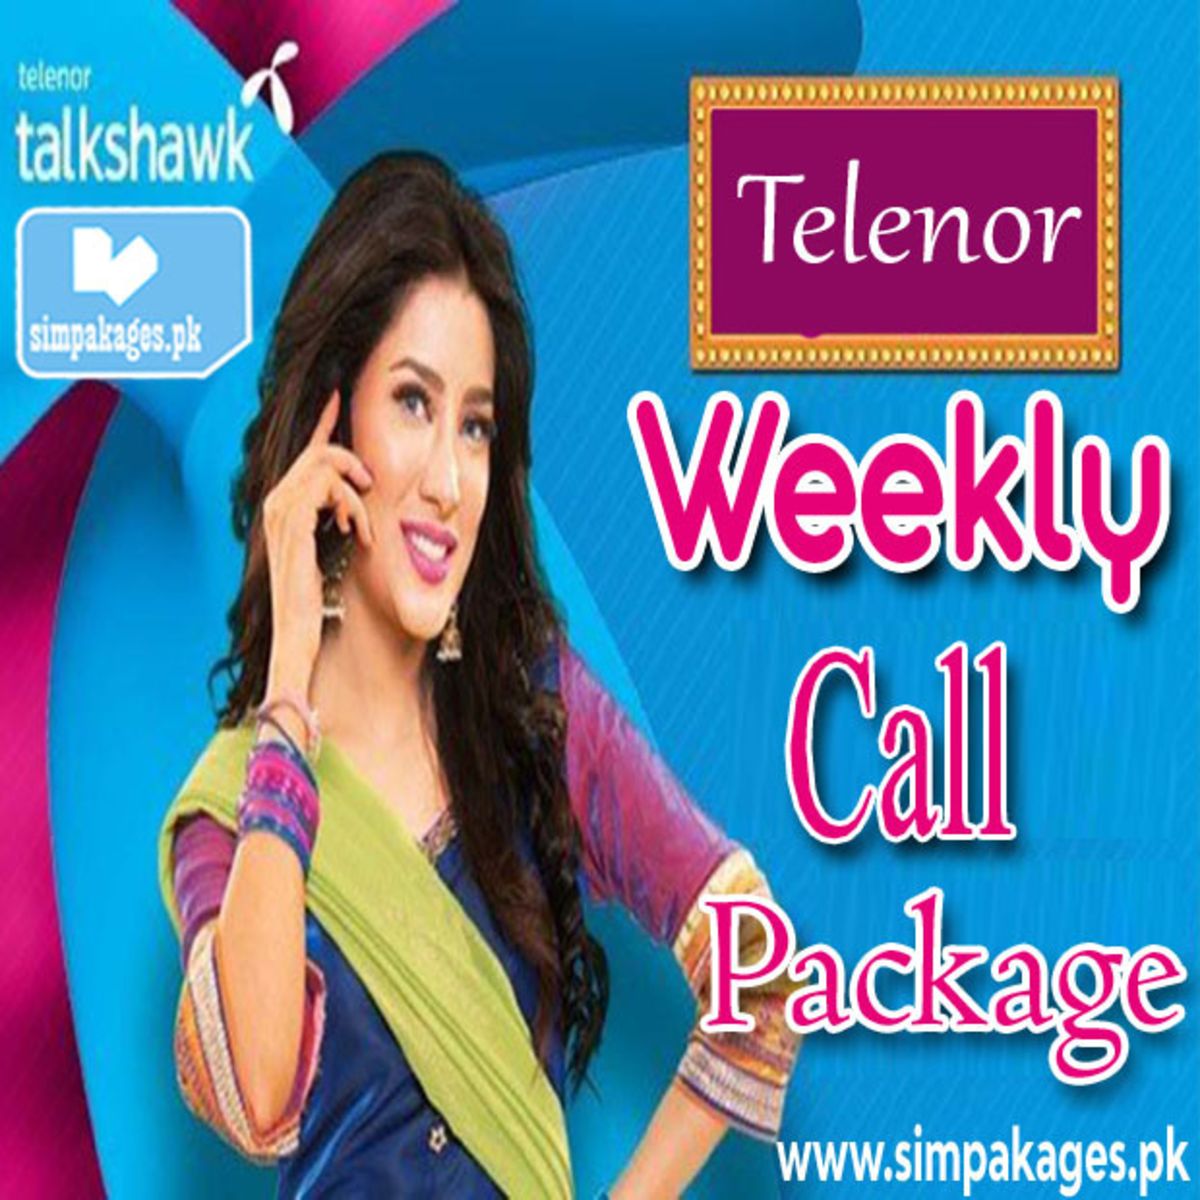 telenor weekly call Packages